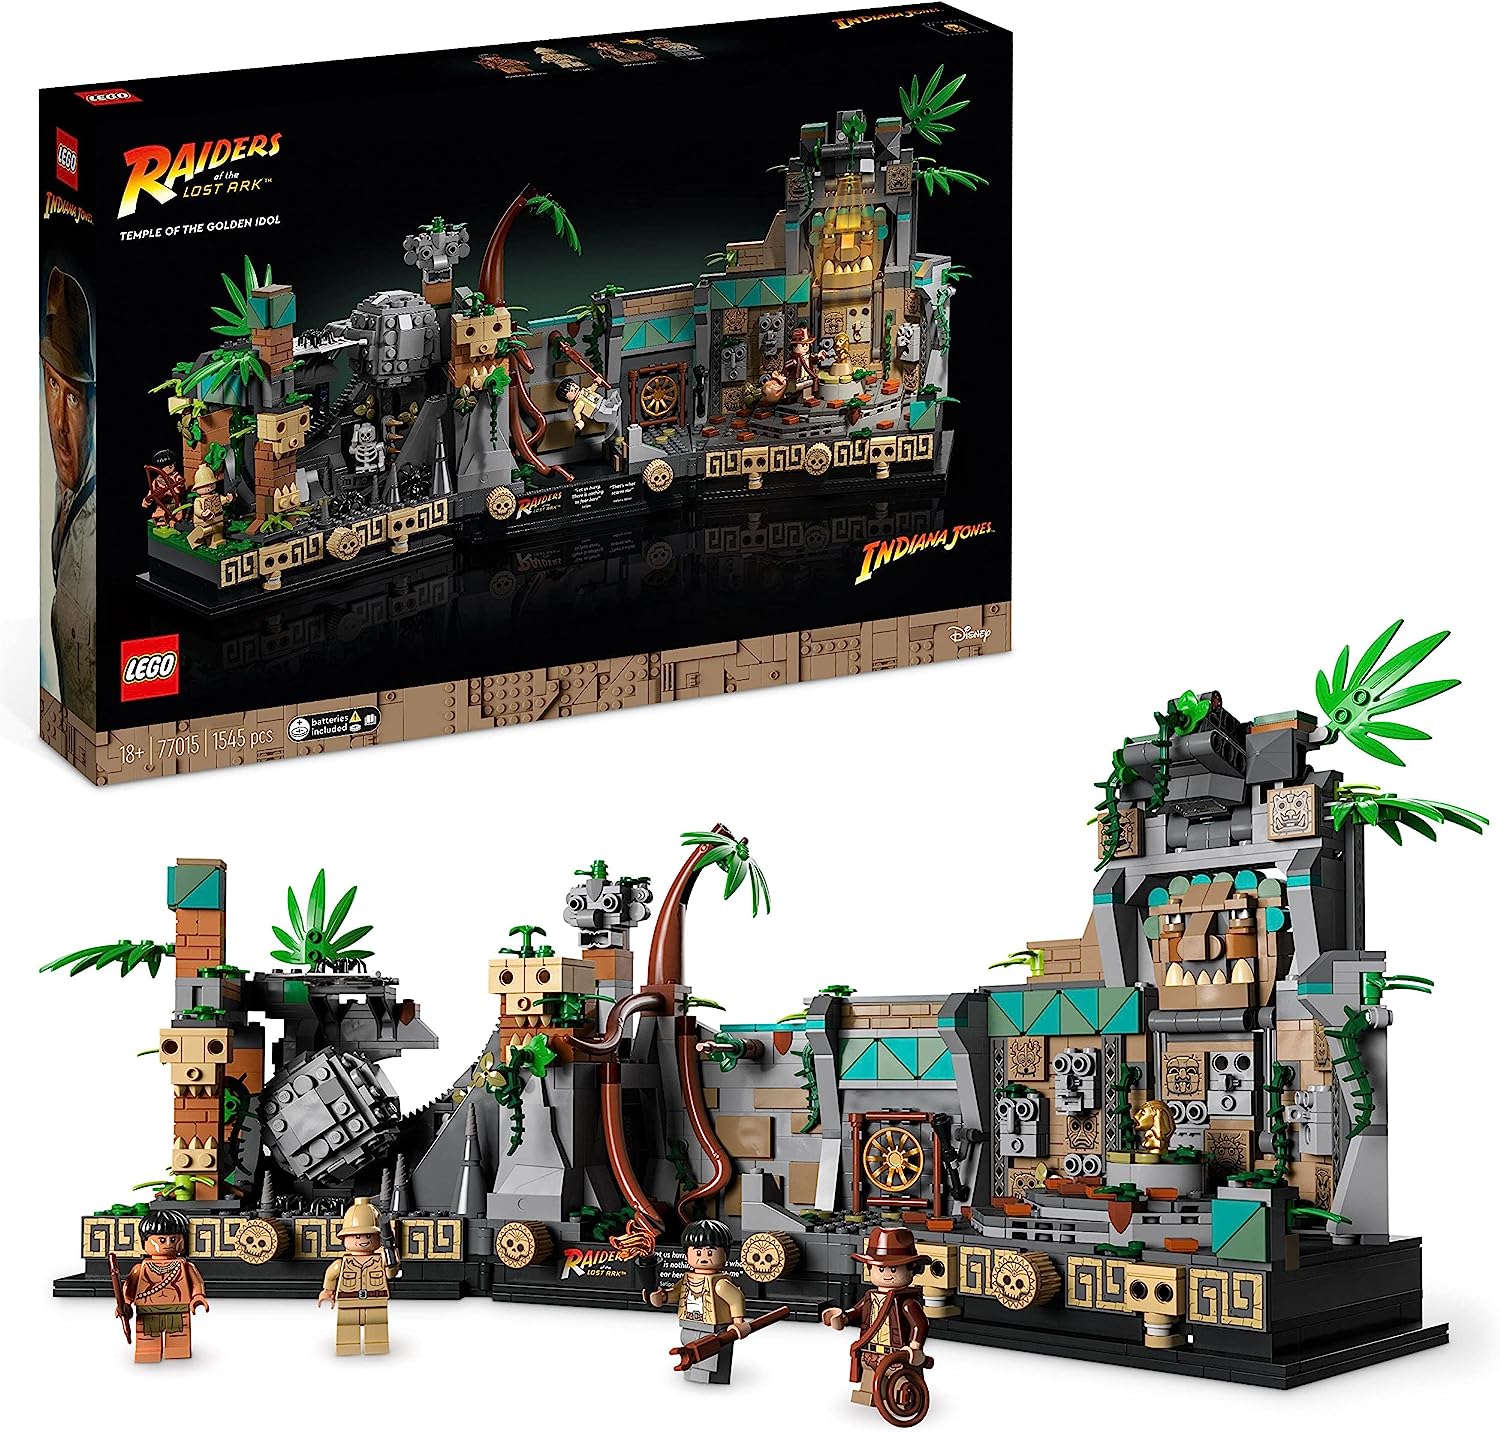 LEGO 77015 Indiana Jones Temple of Golden Goddess Model Kit for Adults, Hunter Of The Lost Treasure Film Set With Interactive Functions and Mini Figures